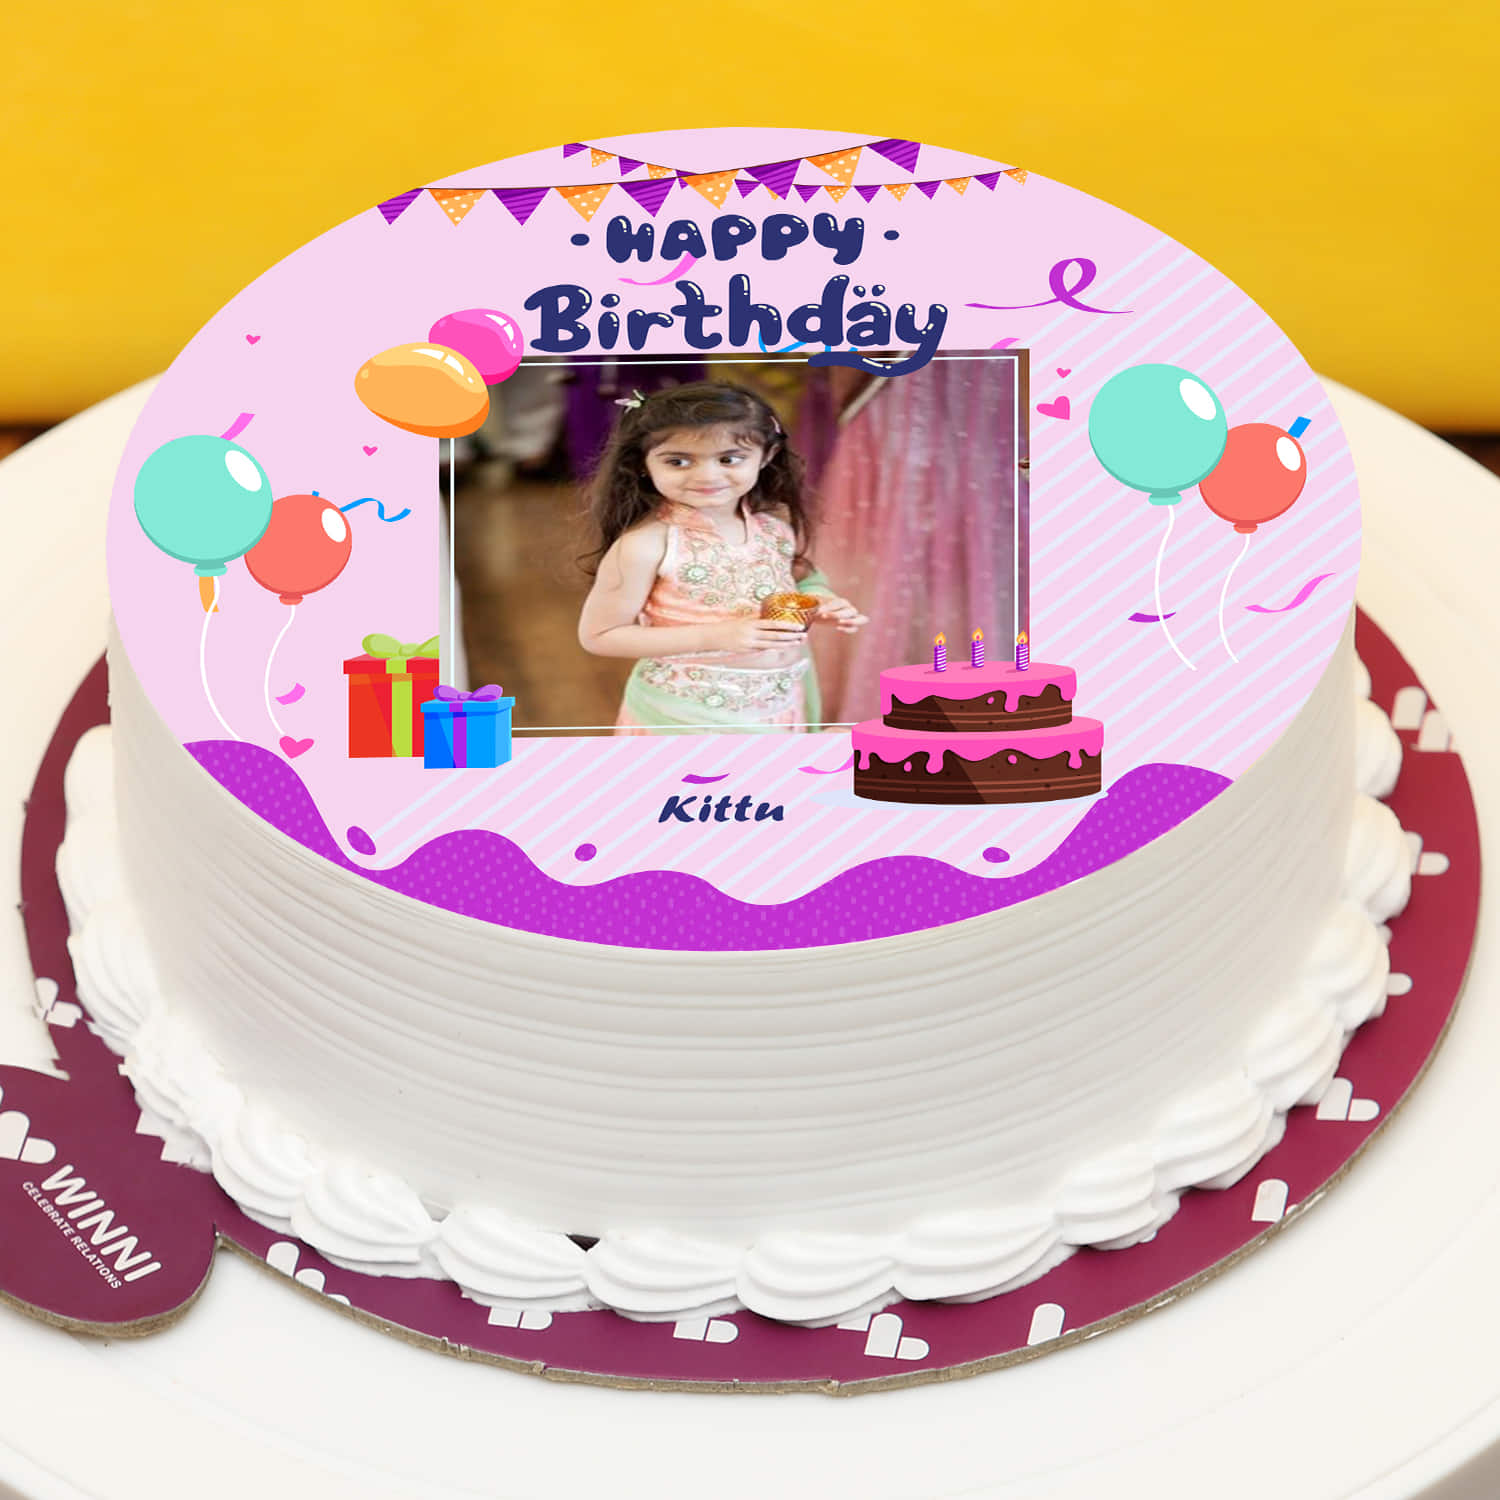 Decorating The Sweetest Birthday Cakes For Girls • A Subtle Revelry